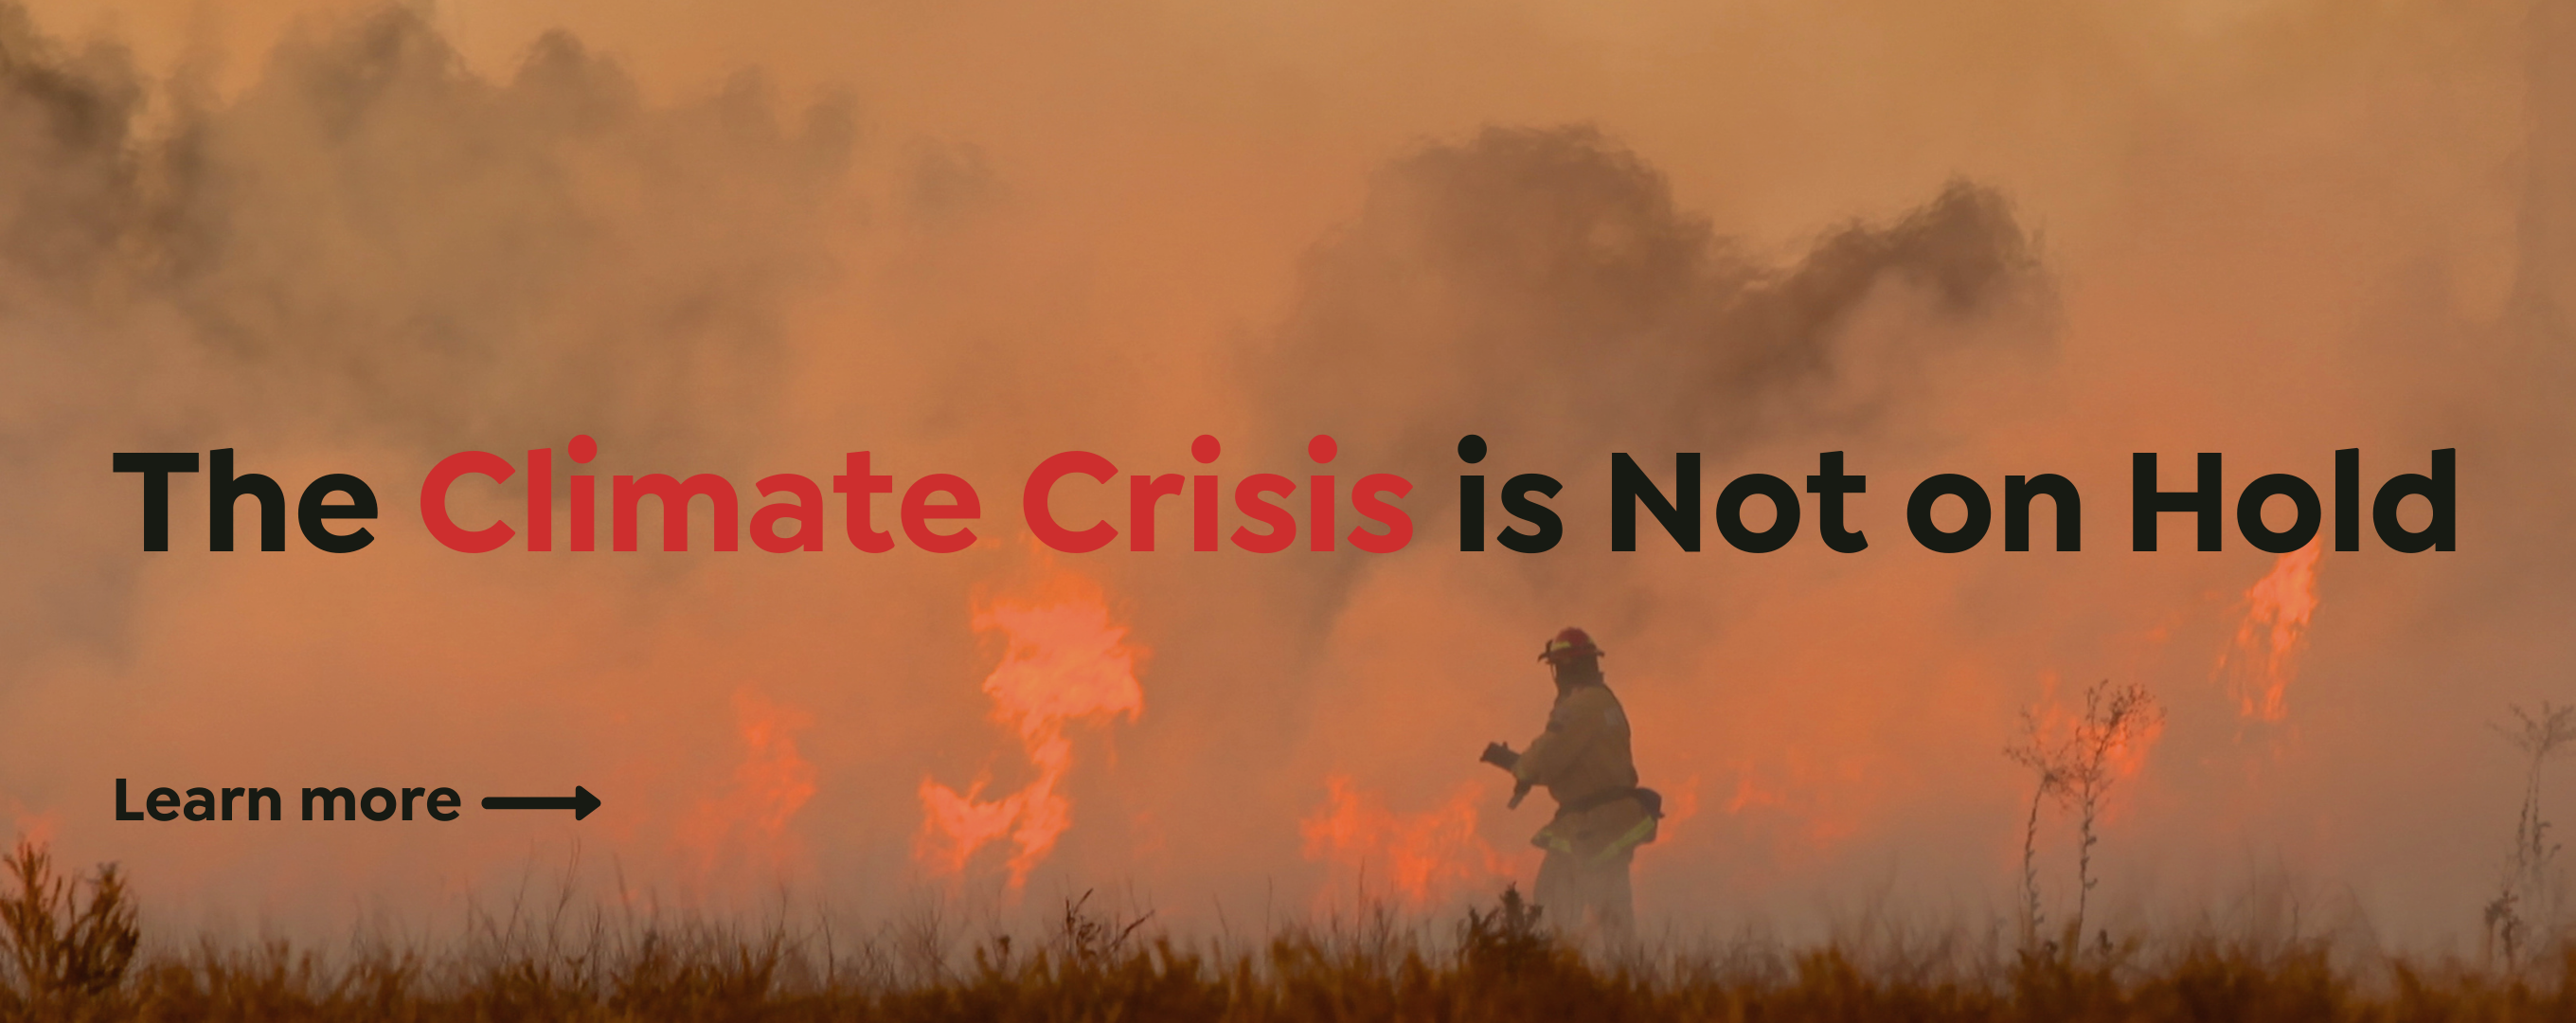 Climate Crisis not on hold